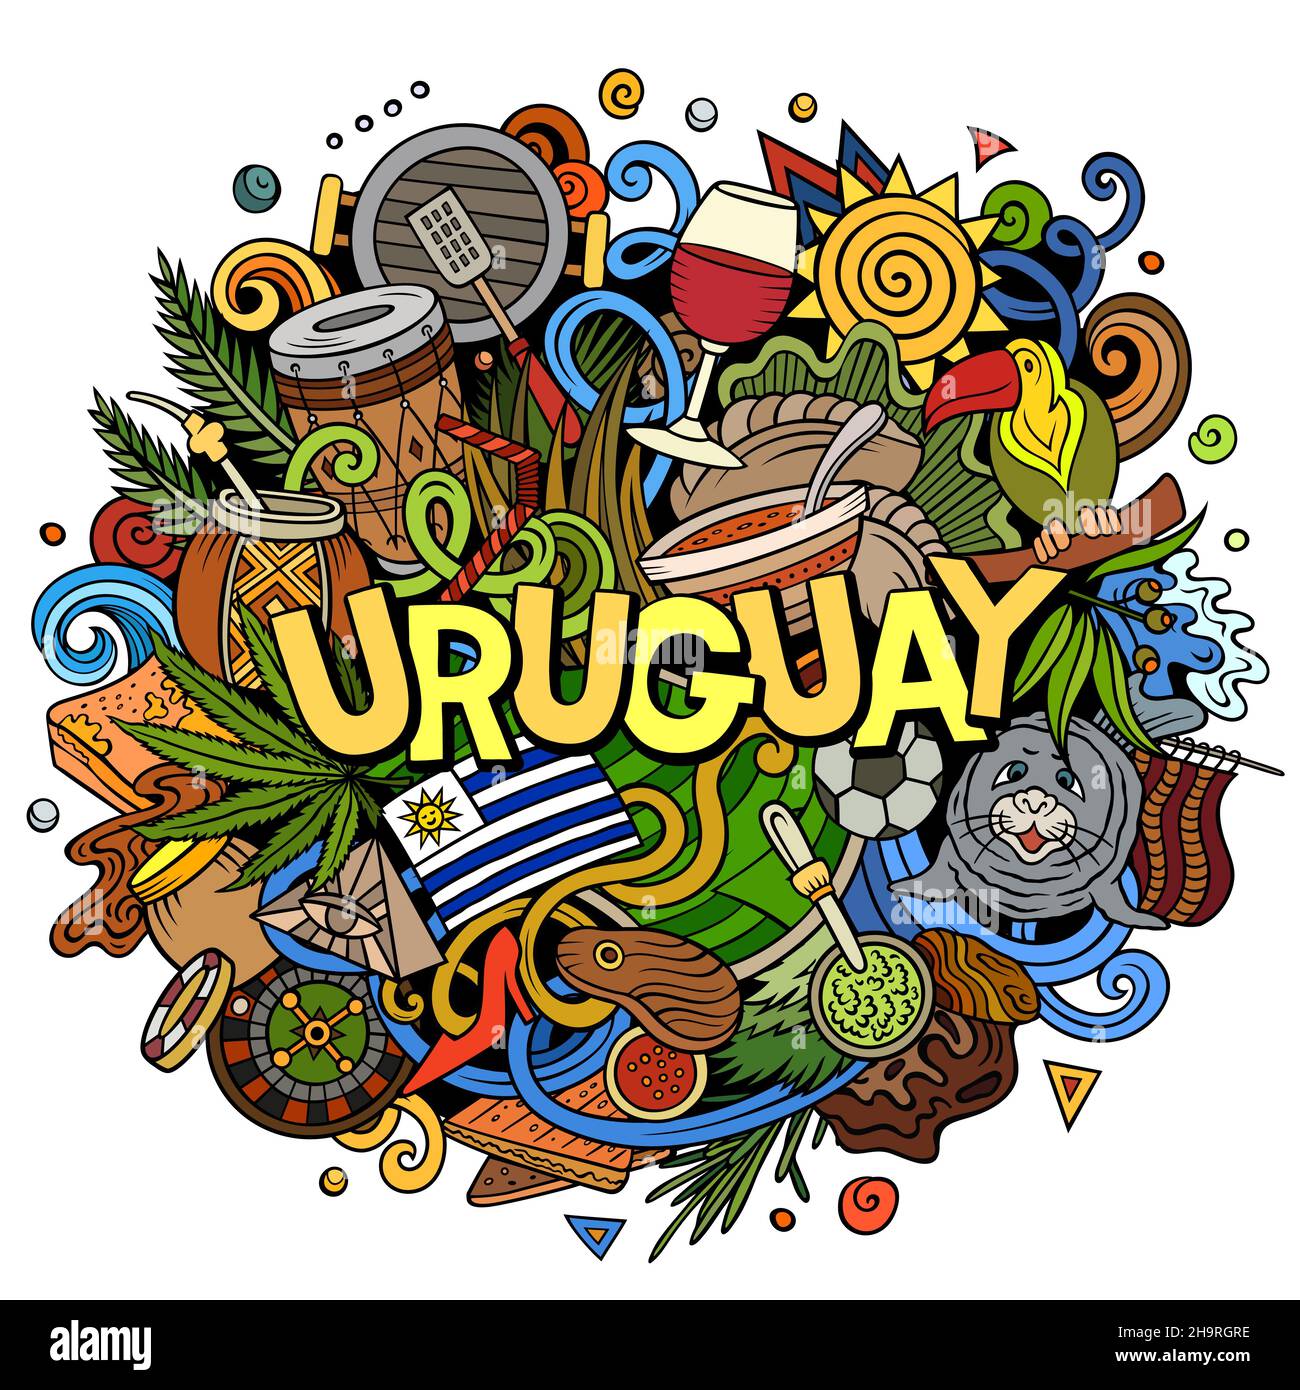 Uruguay hand drawn cartoon doodle illustration. Funny local design. Creative vector background. Handwritten text with Latin American elements and obje Stock Vector